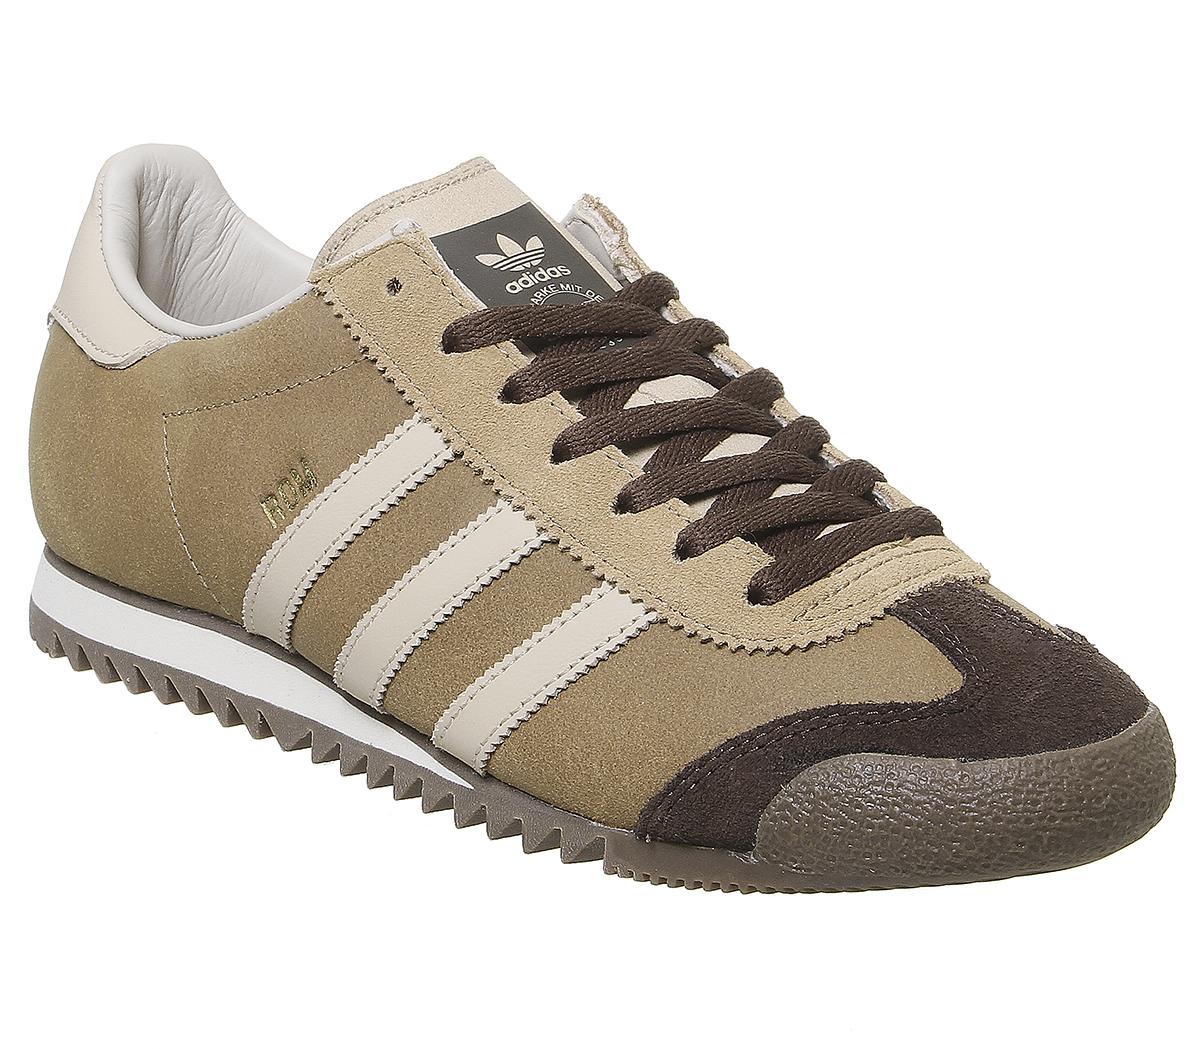 adidas rom trainers brown